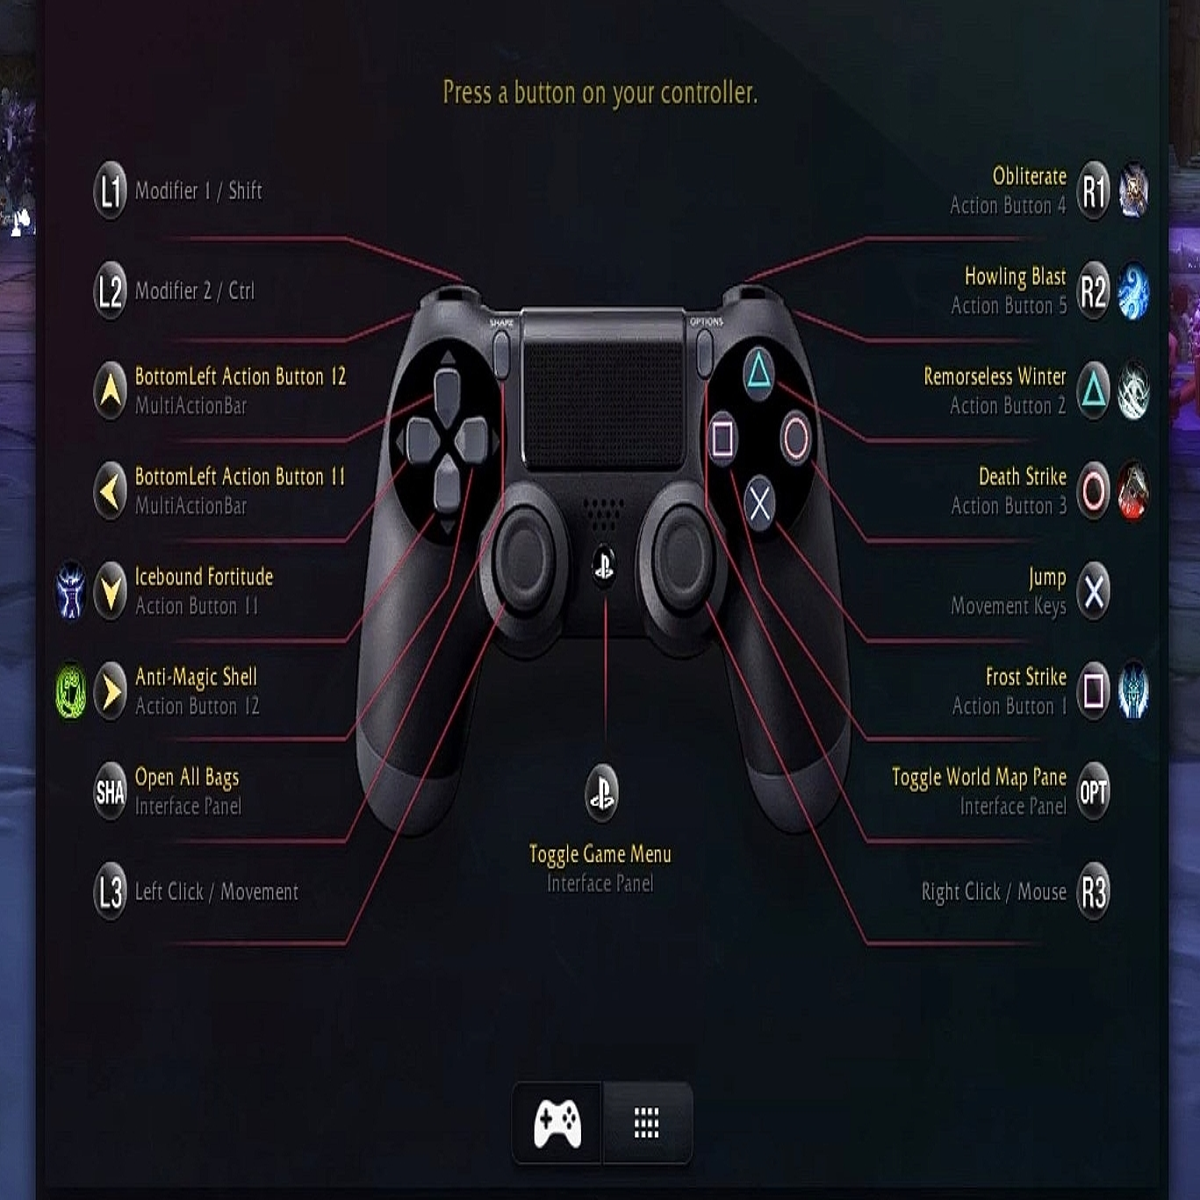 Max Payne Mobile Controller Support